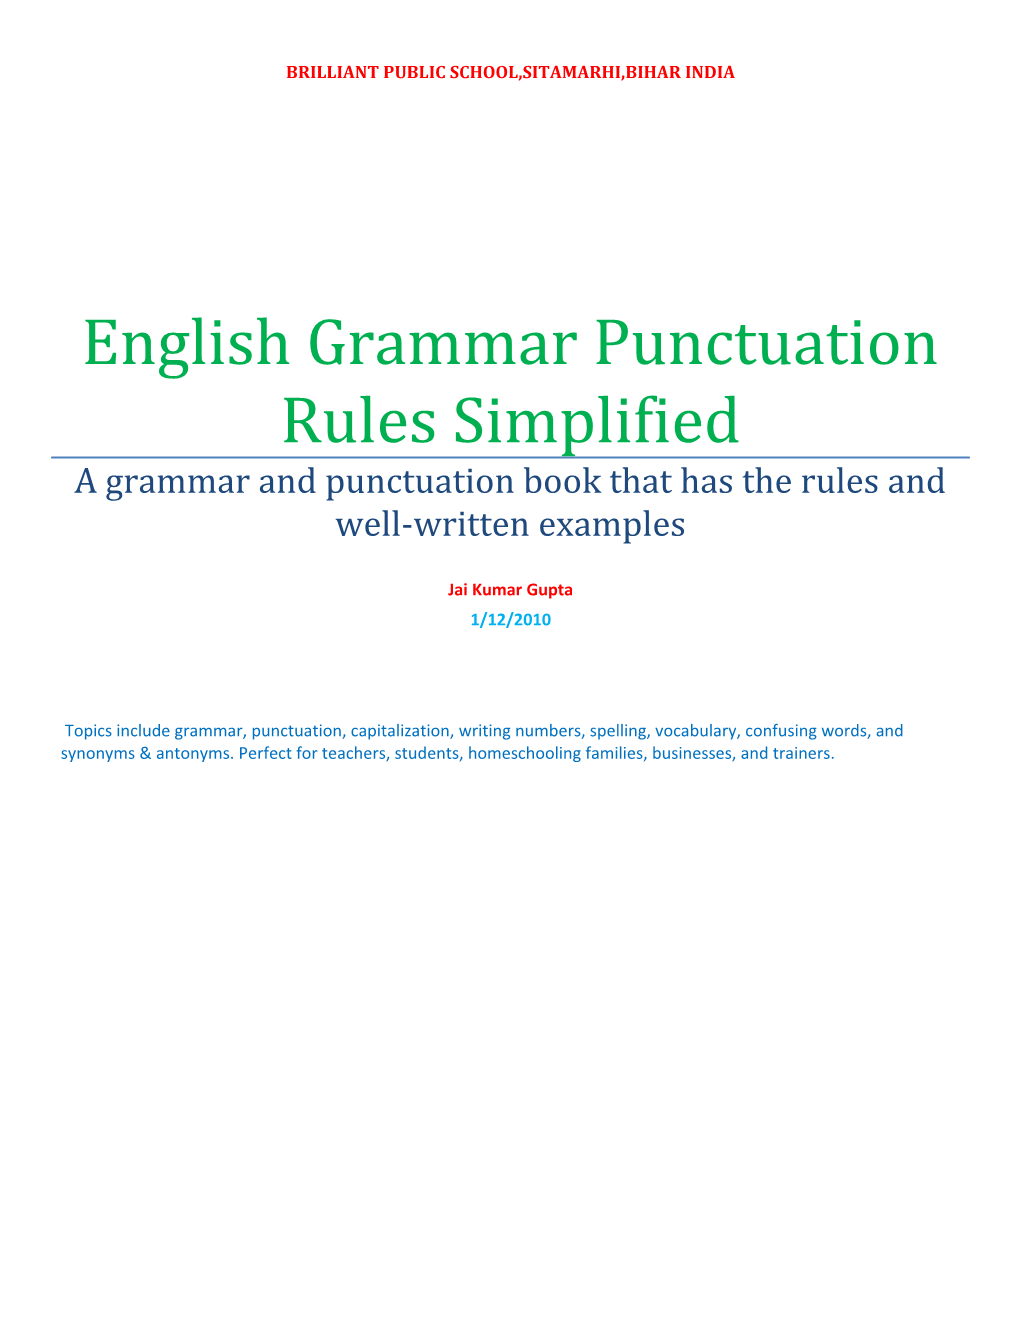 English Grammar Punctuation Rules Simplified